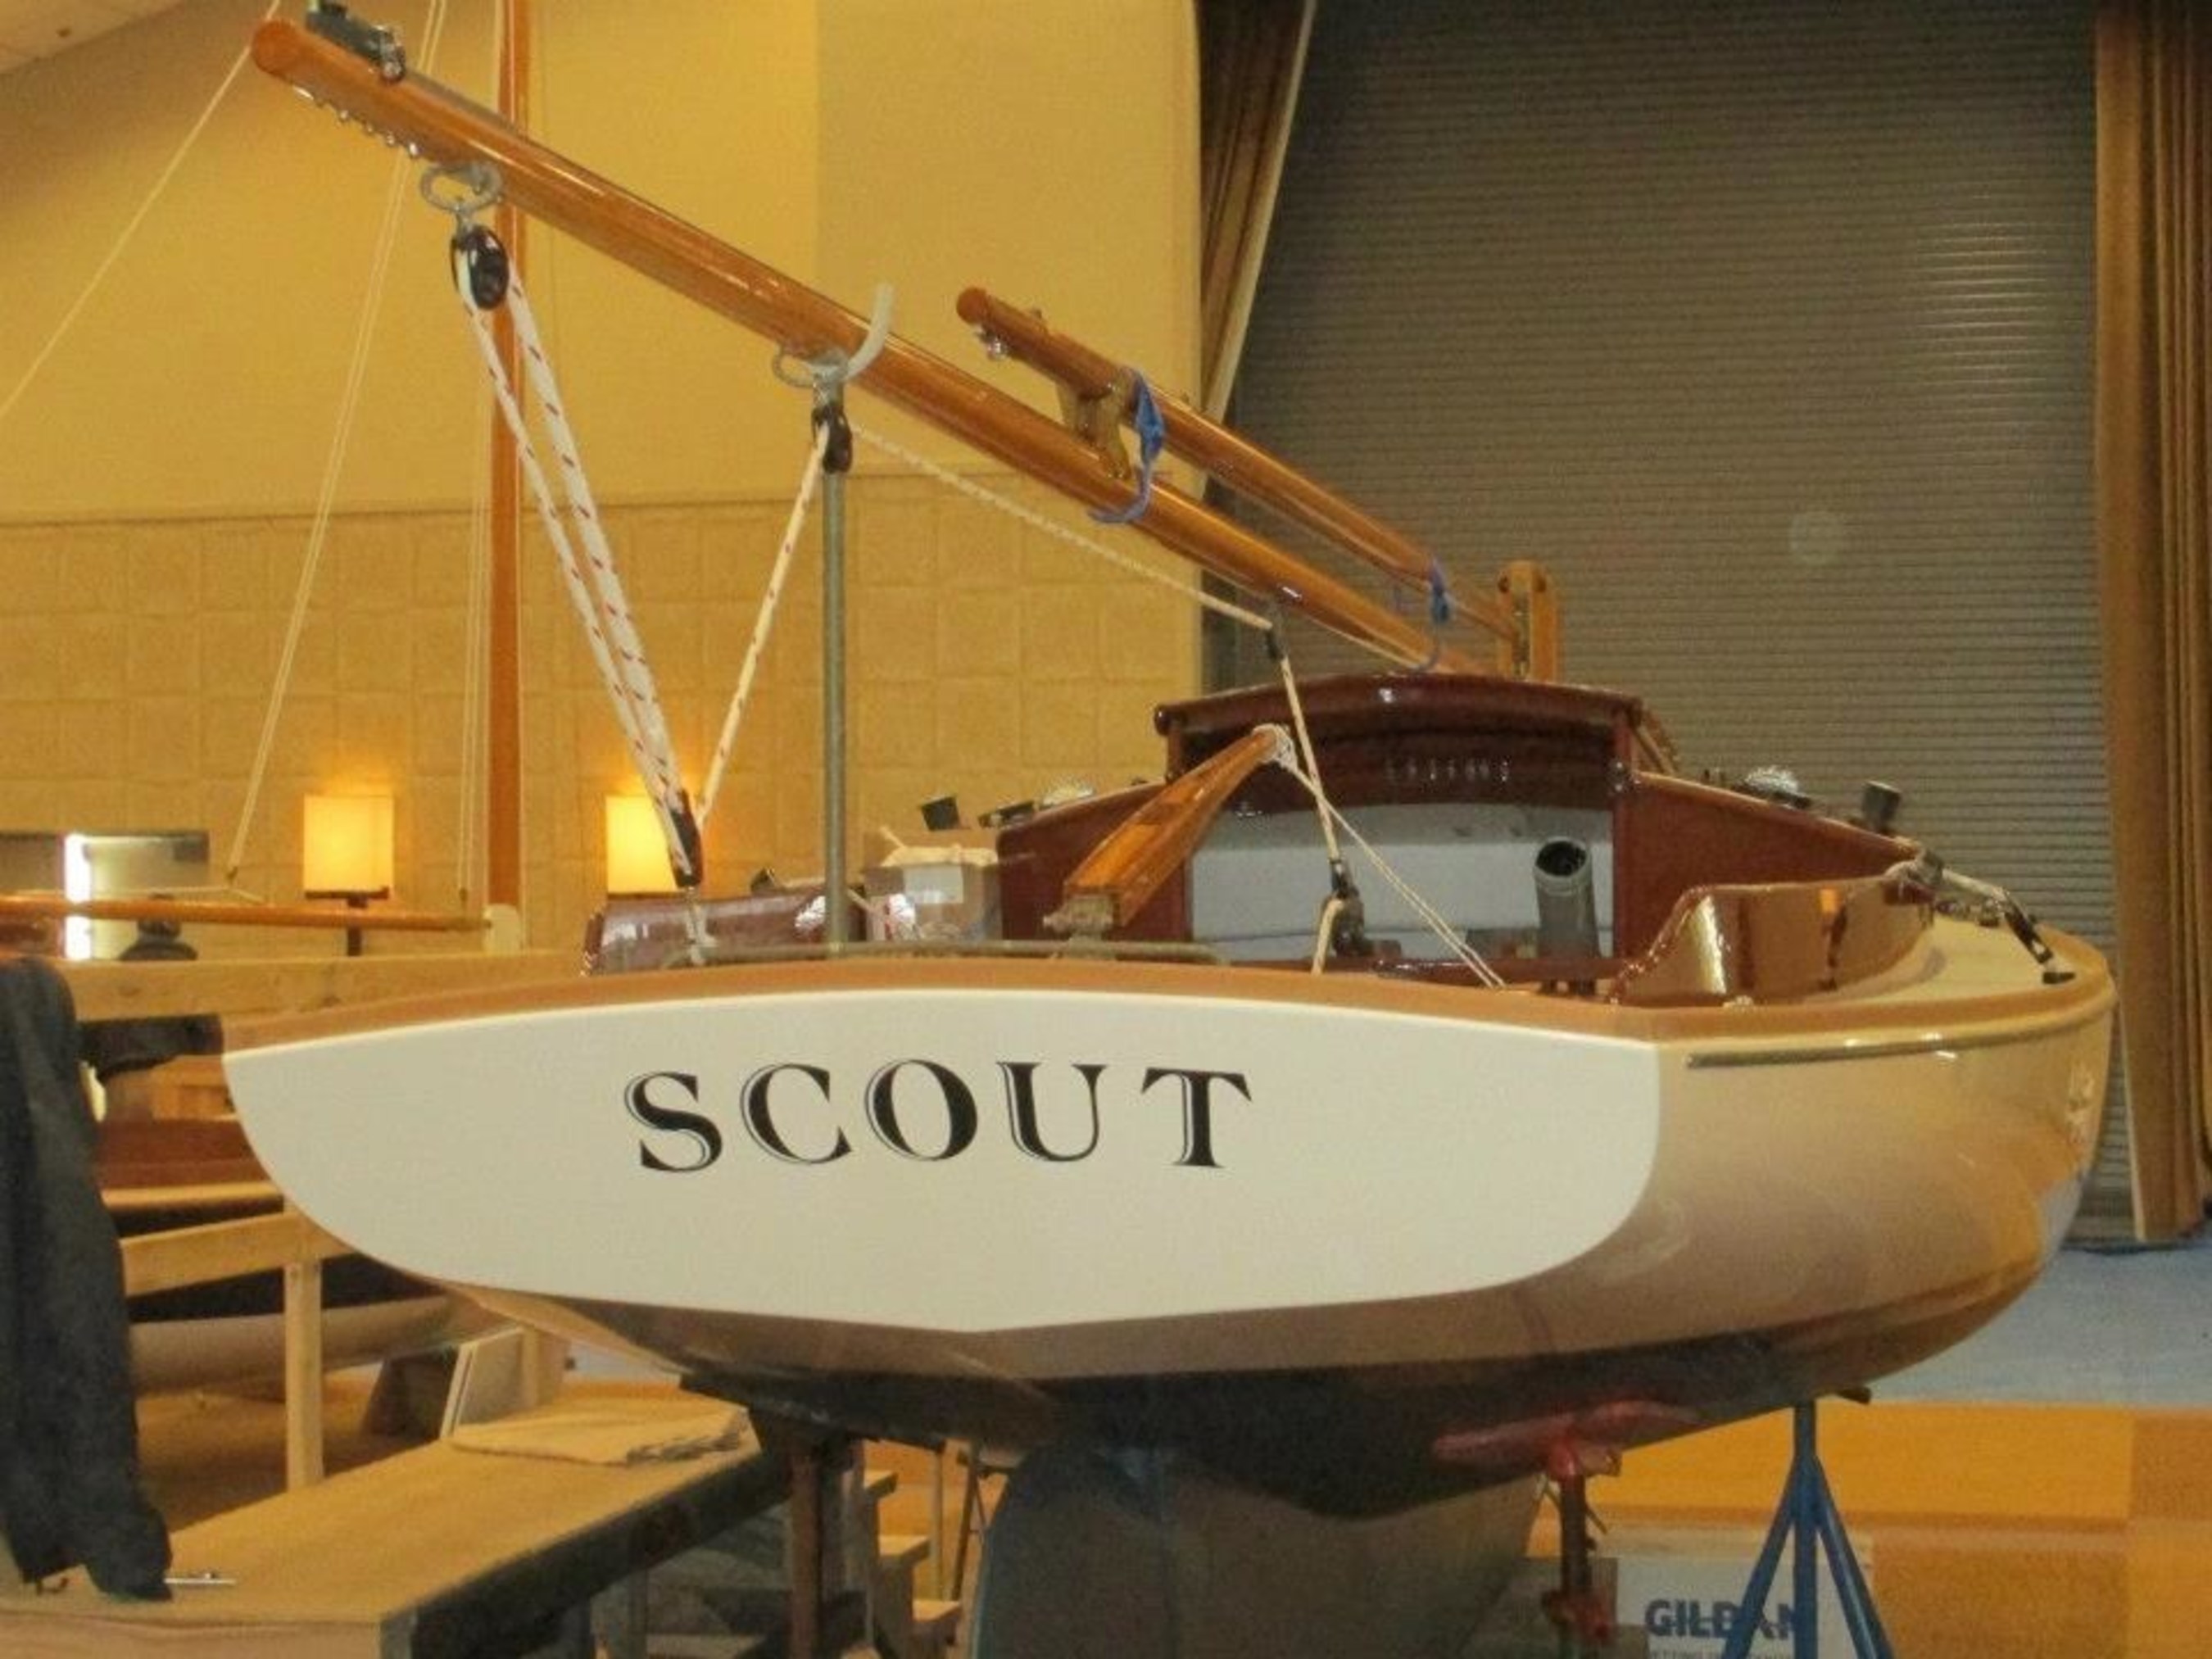 Enjoy the Art of Boatbuilding and amazing craftsmen Feb 6 to 8 at the Boatbuilders Show at the Conference Center in Hyannis on Cape Cod